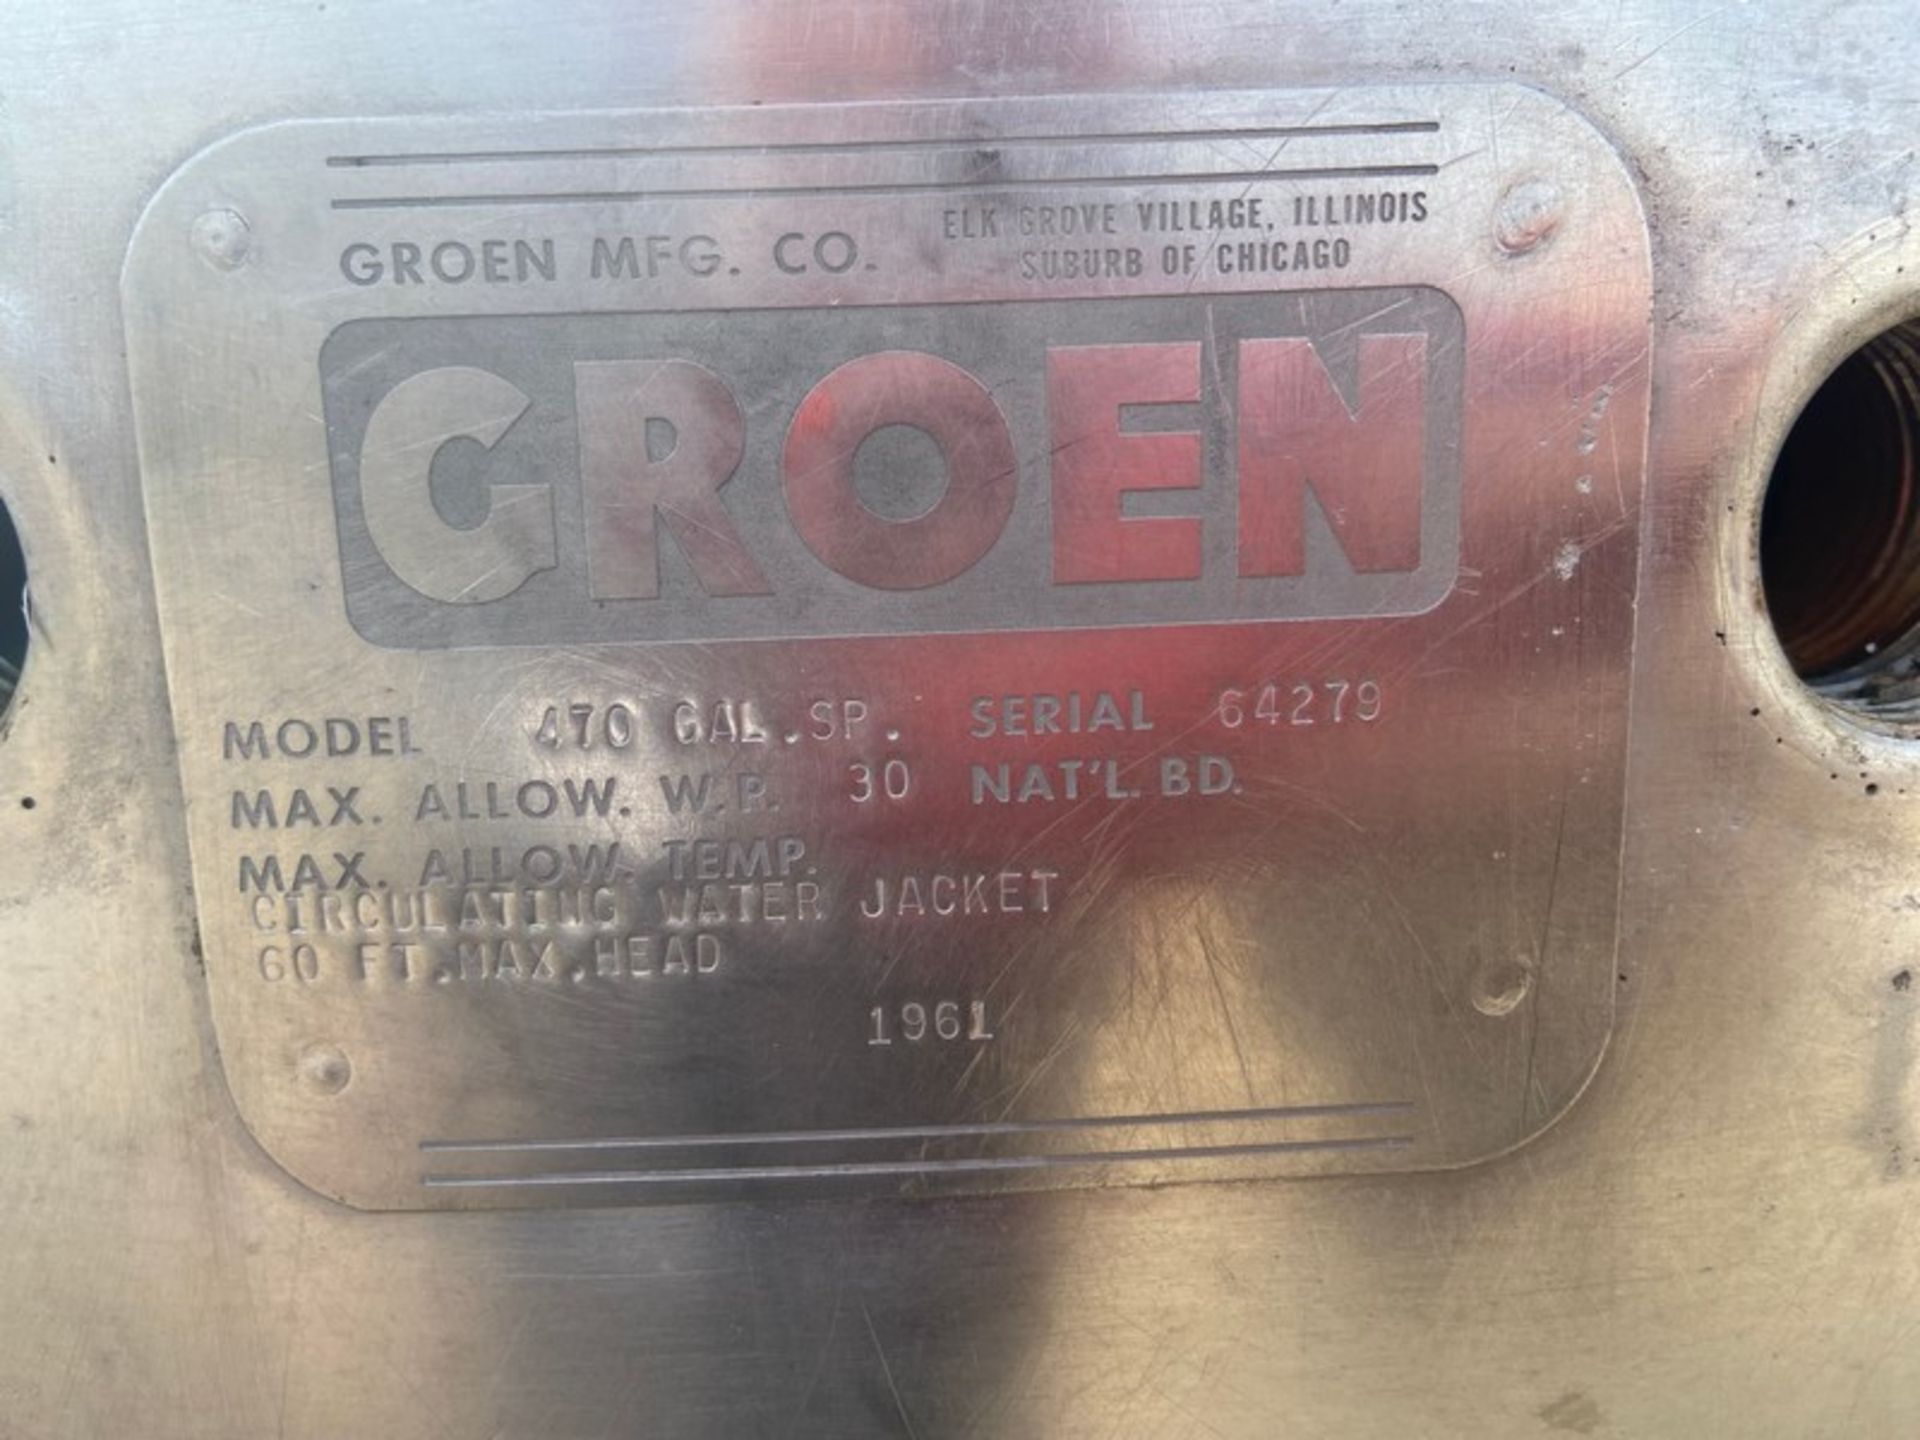 Groen 470 Gal. S/S Processor, S/N 64279, Max. Allow W.P. 30, with Circulating Water Jacket ( - Image 7 of 7